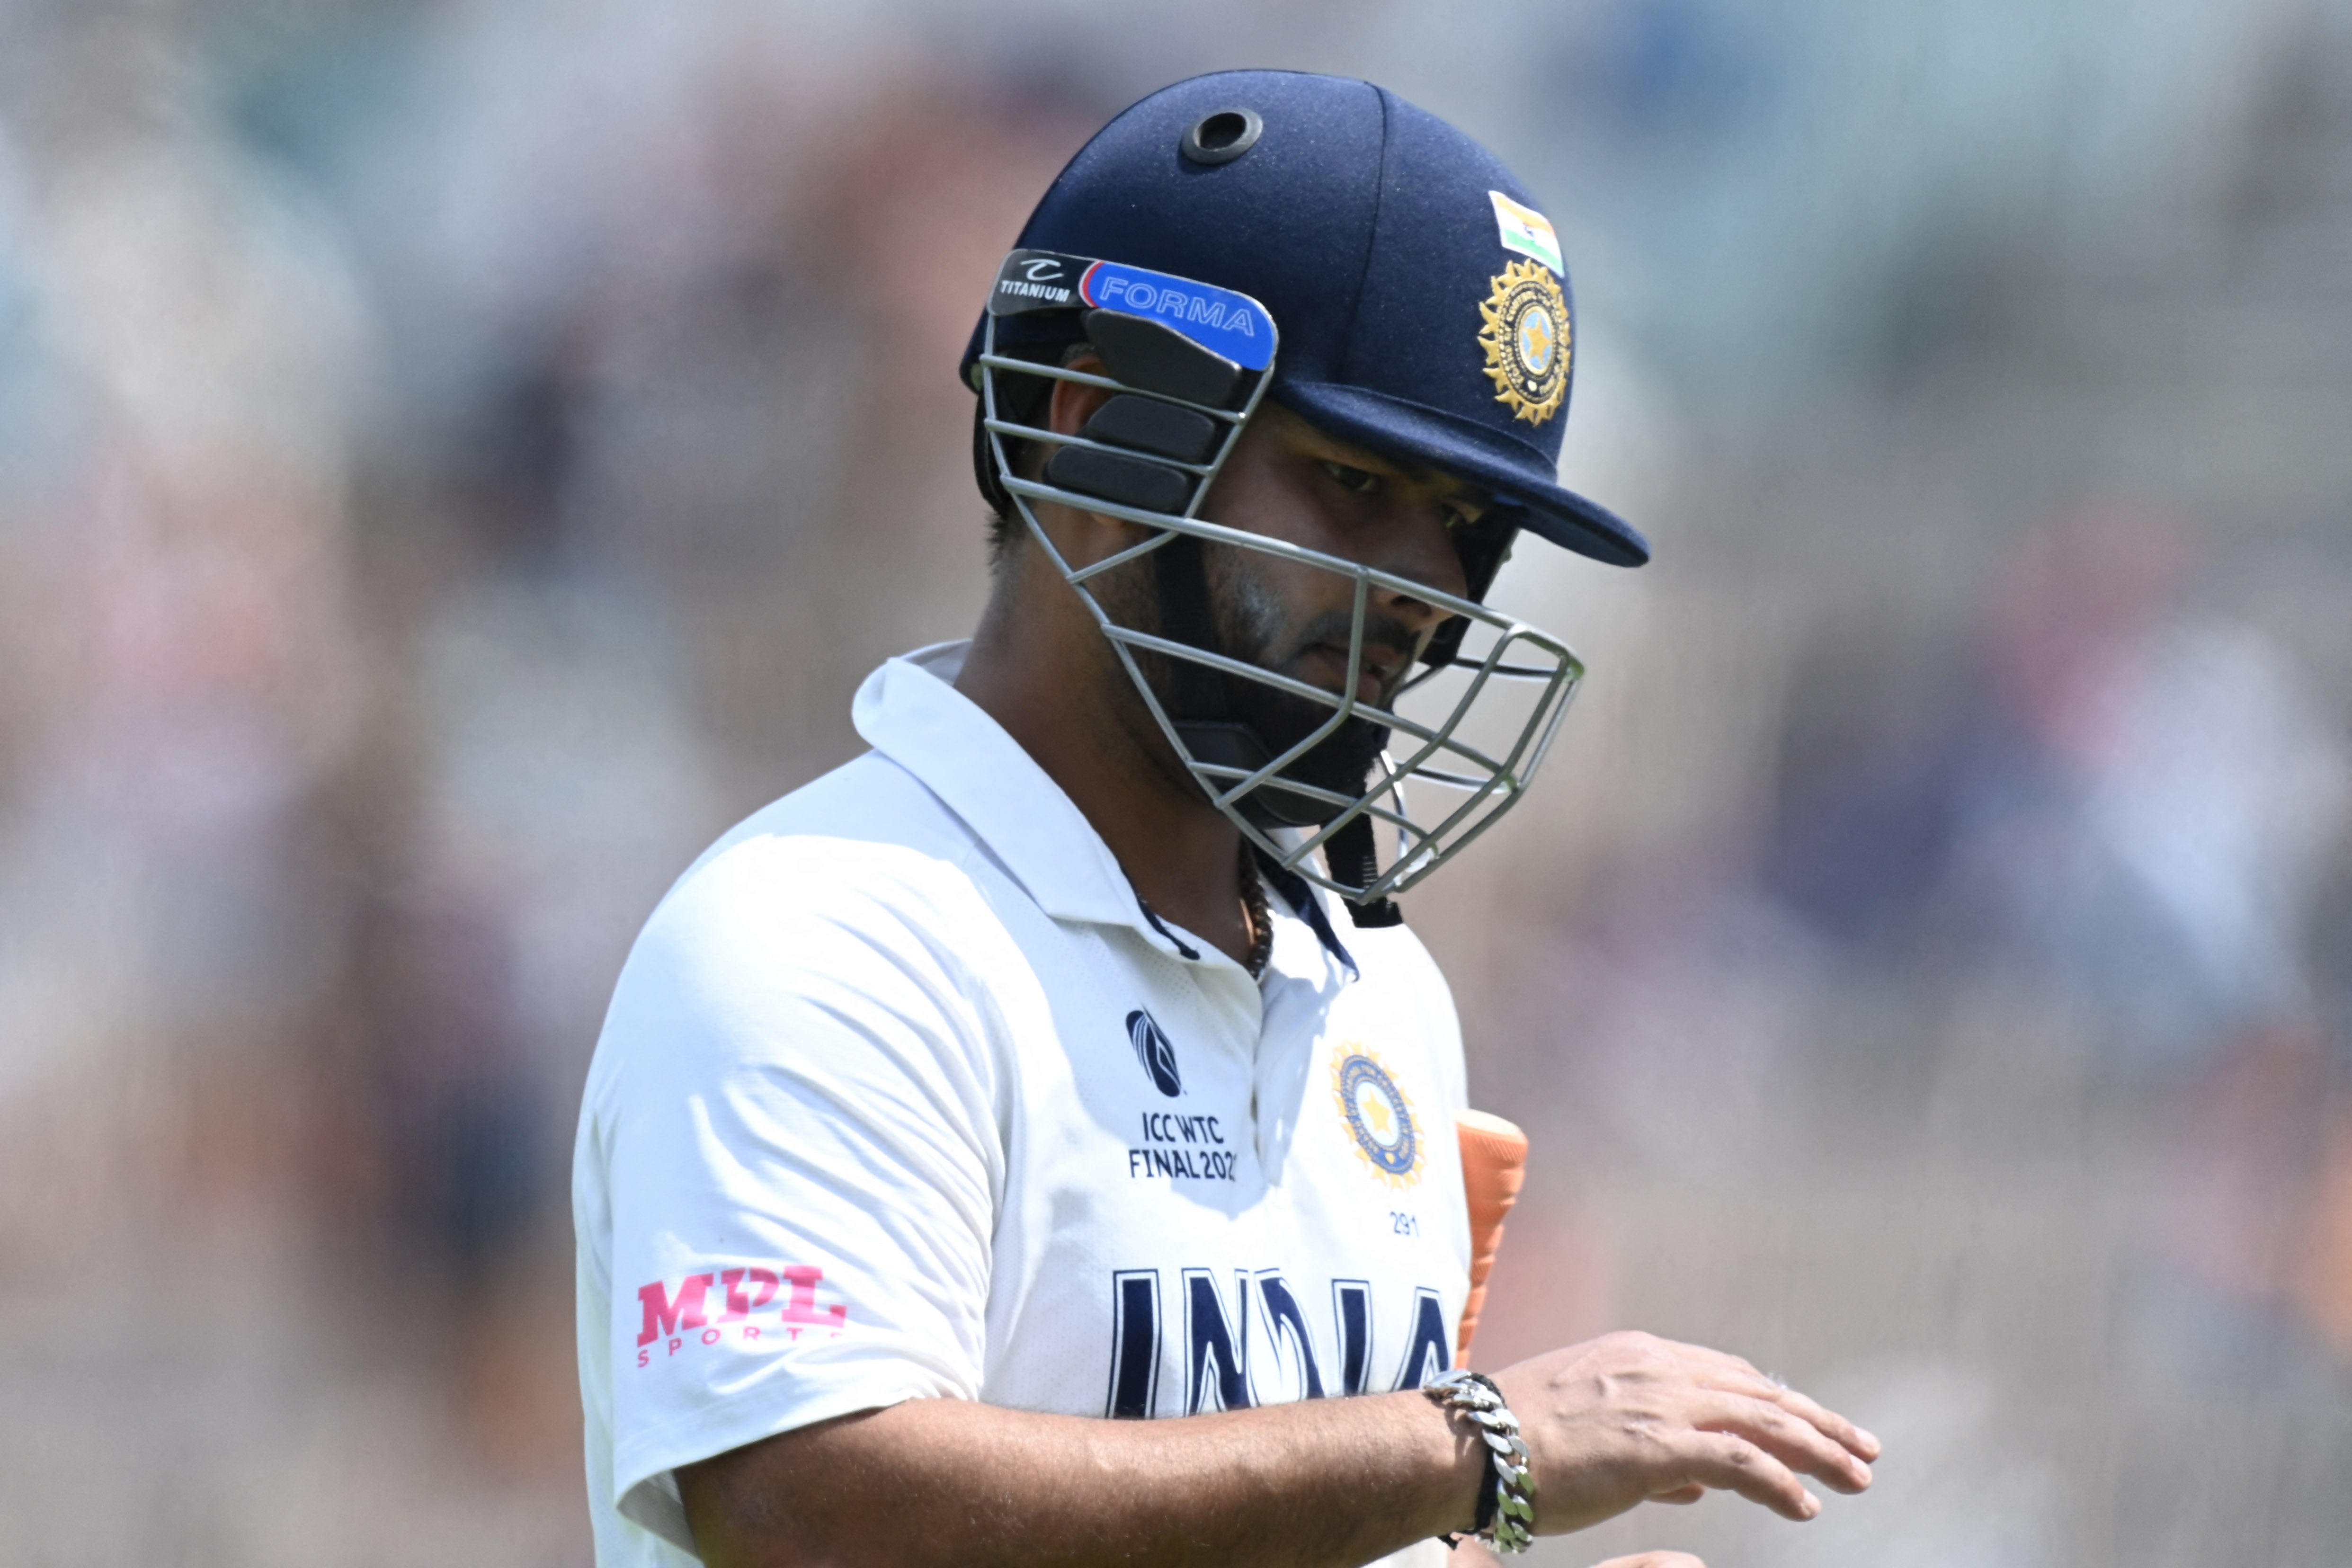 File: Rishabh Pant leaves the pitch on the final day of the ICC World Test Championship Final on 23 June, 2021